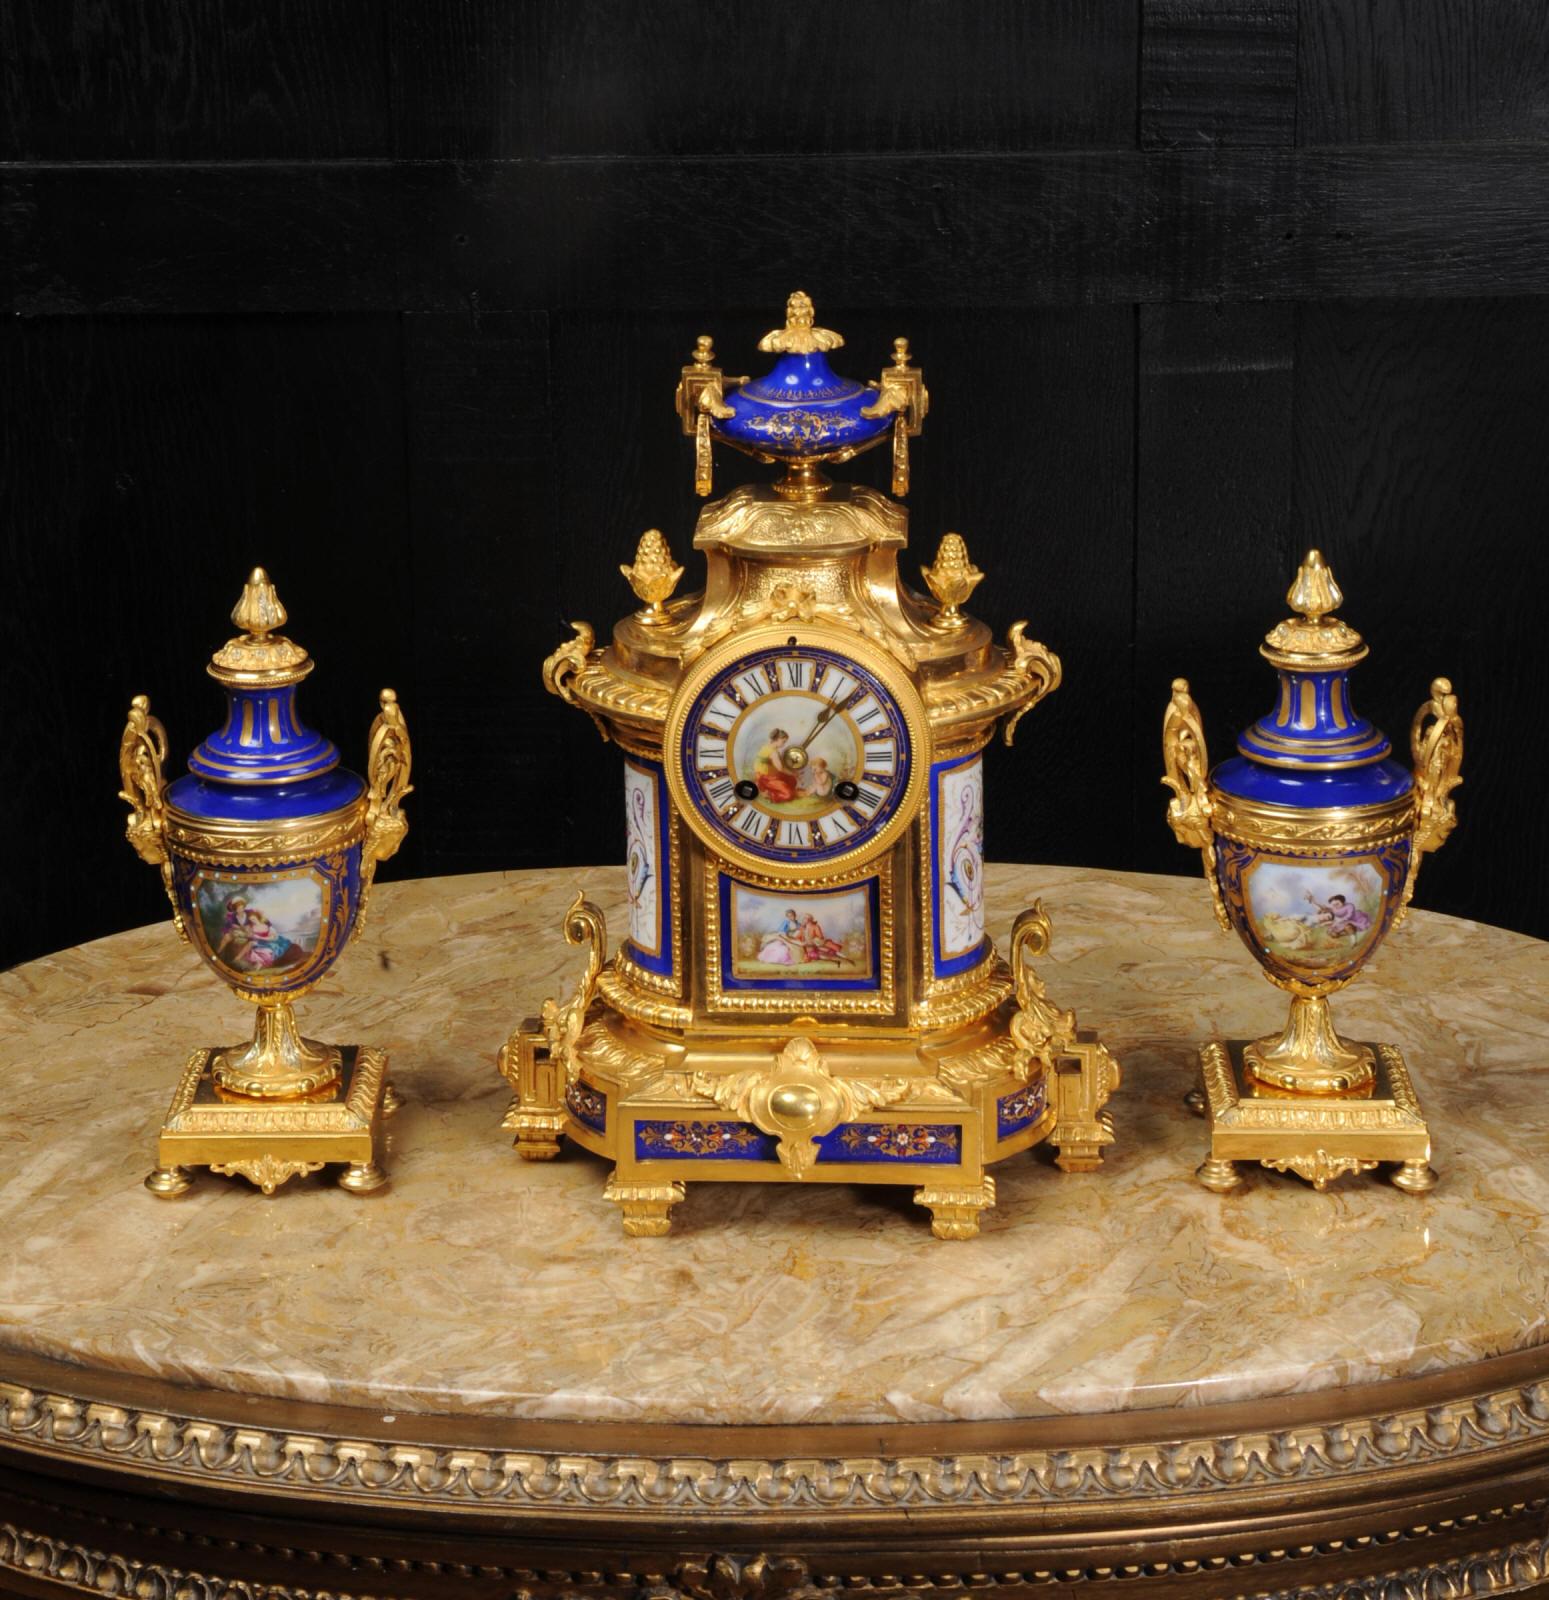 A beautiful antique French ormolu (finely gilded bronze) and Sevres type porcelain clock set, circa 1870. It is by the famous clockmaker Japy Freres and was retailed in London by Richard et Cie. It features a stunning set of porcelain panels with a